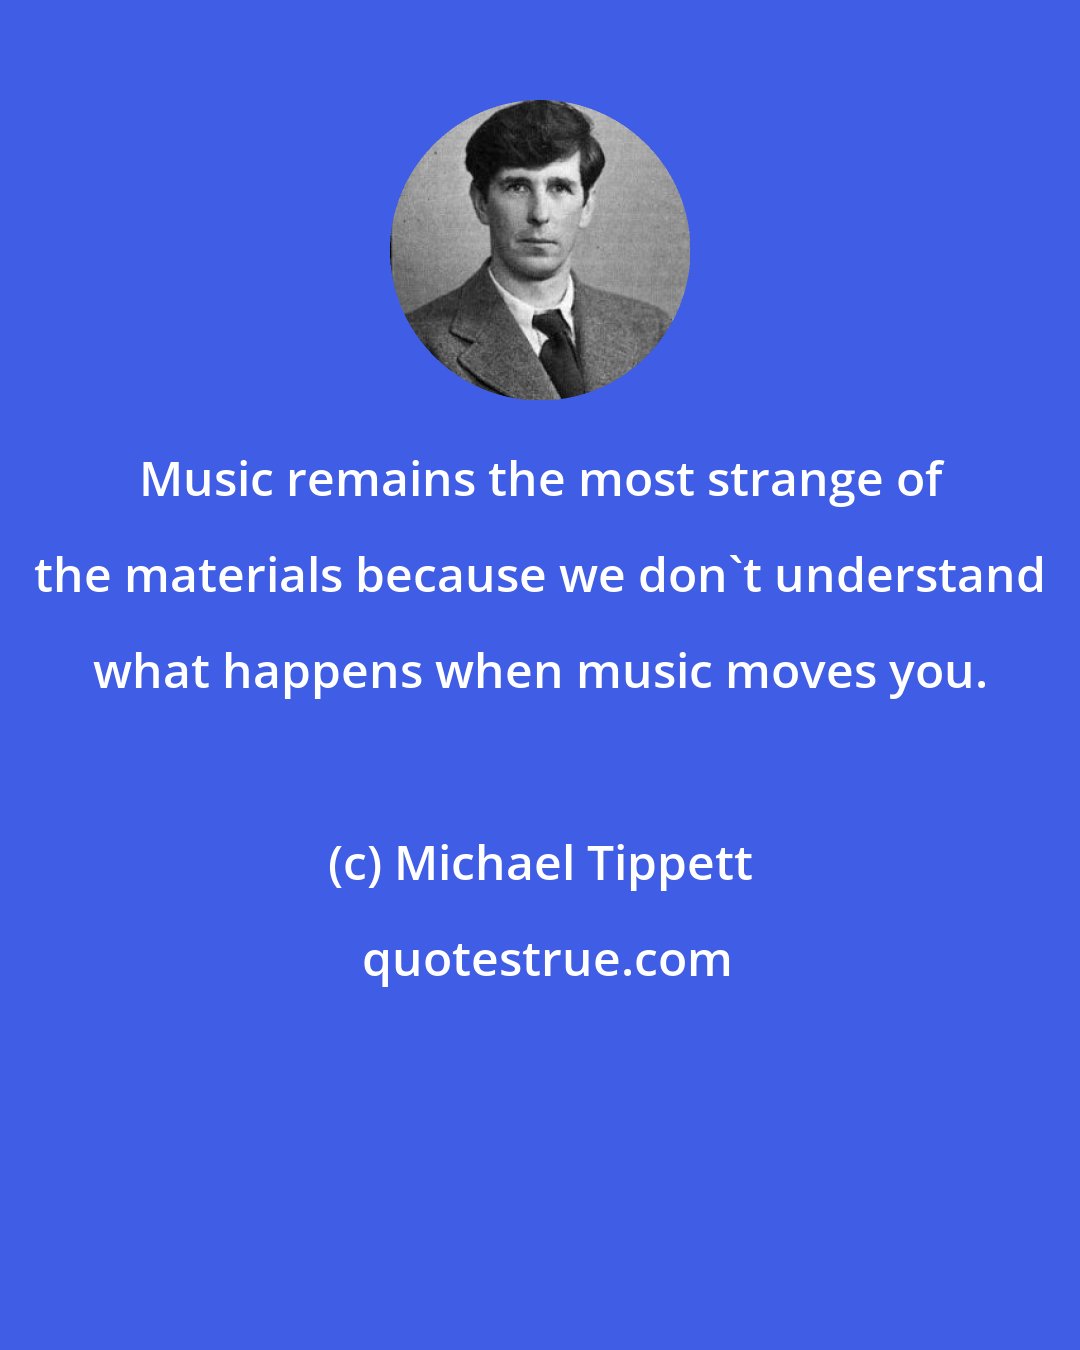 Michael Tippett: Music remains the most strange of the materials because we don't understand what happens when music moves you.